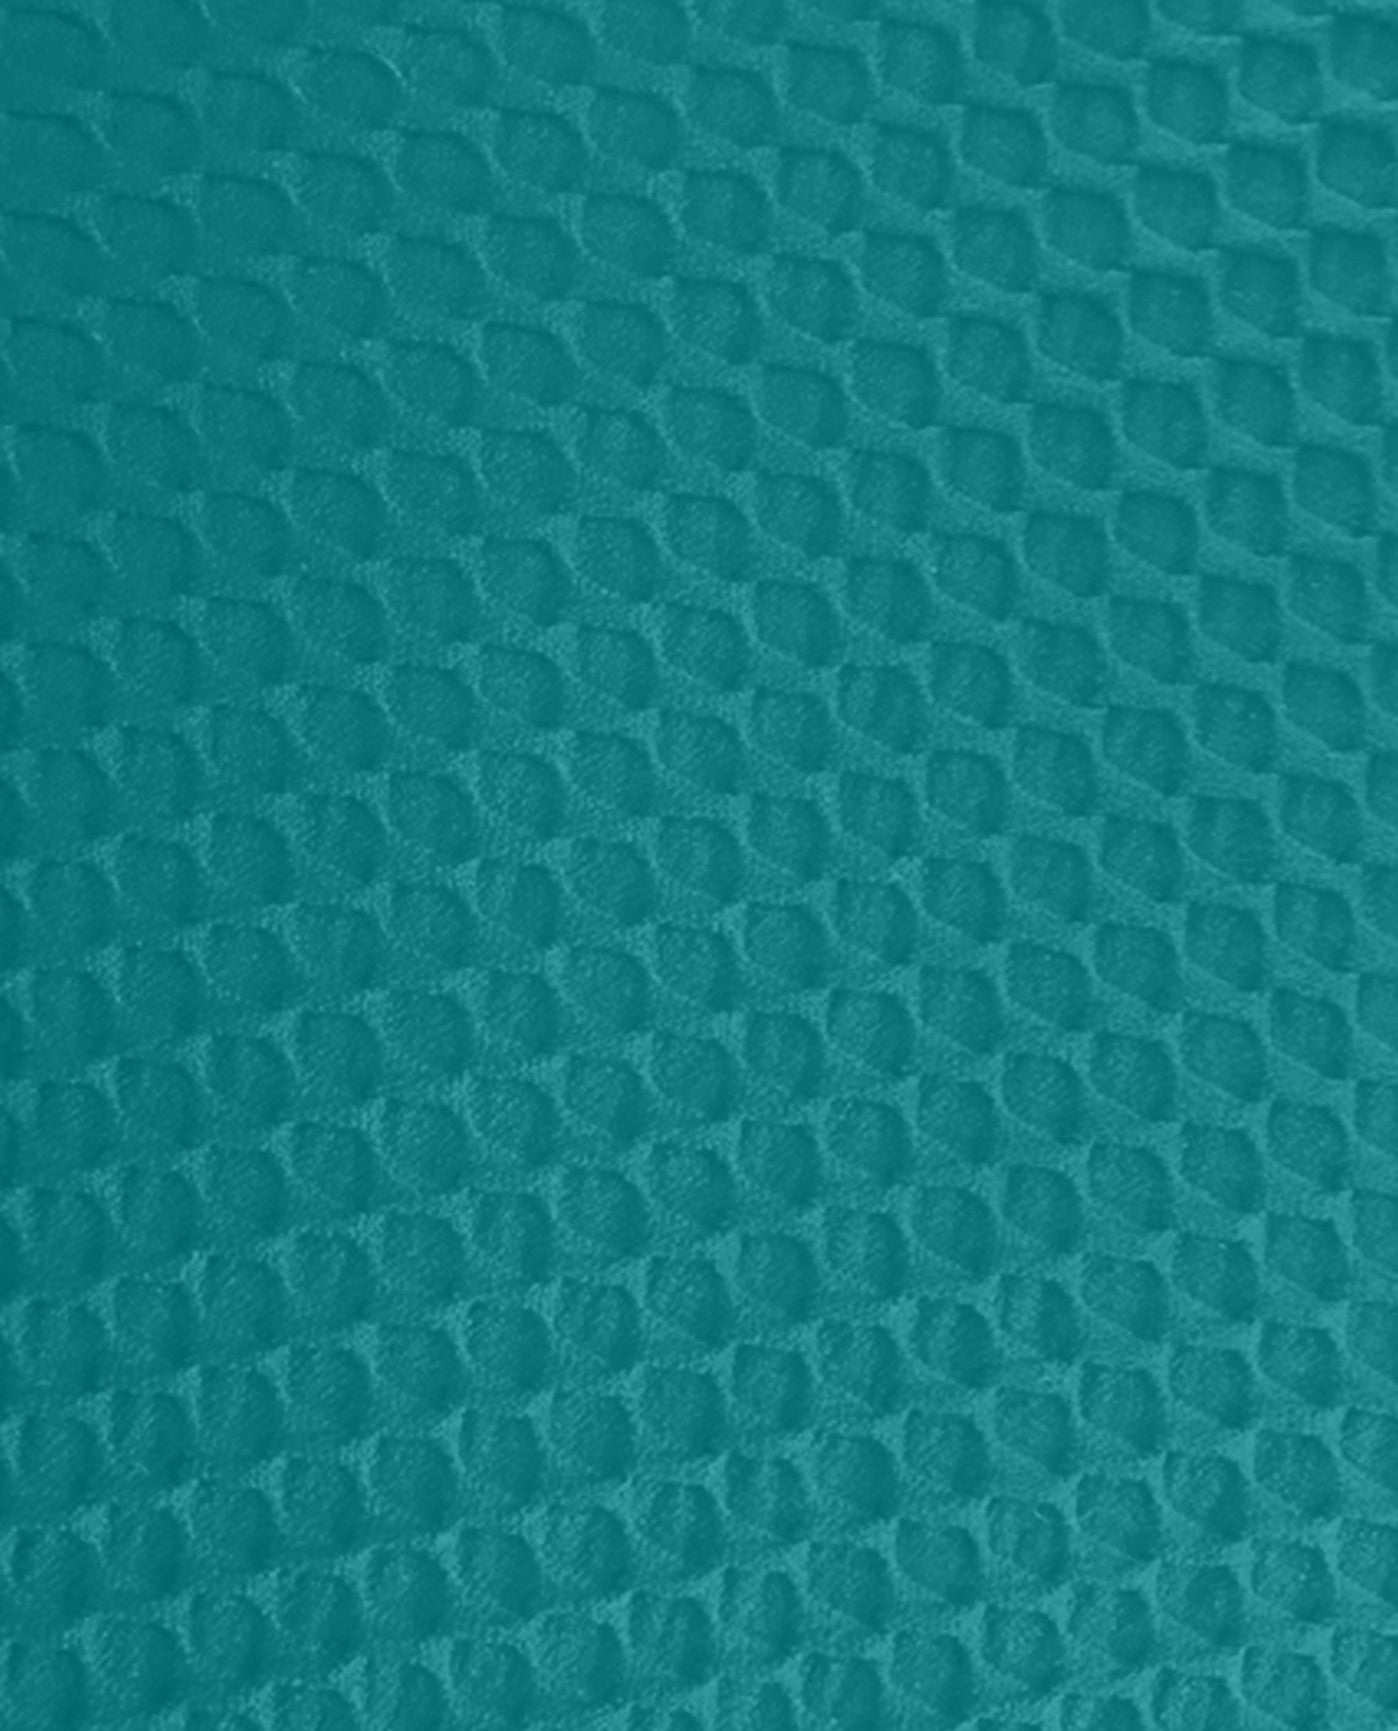 FABRIC SWATCH VIEW OF CHLORINE RESISTANT AQUAMORE SOLID TEXTURED HIGH NECK ONE PIECE SWIMSUIT | 506 AQT TEXTURED JADE